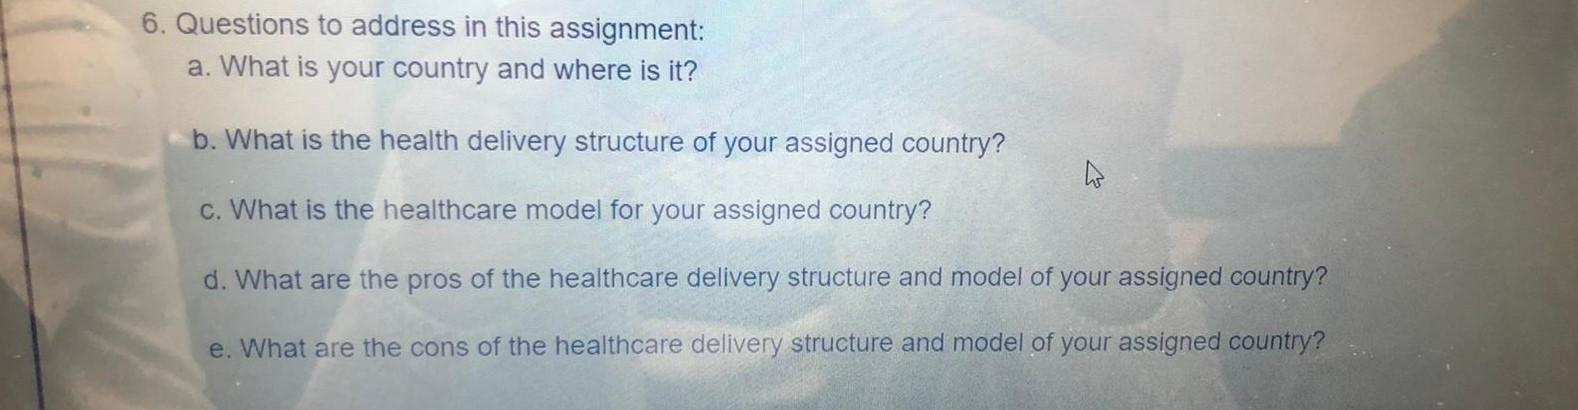 6. Questions to address in this assignment:
a. What is your country and where is it?
b. What is the health delivery structure